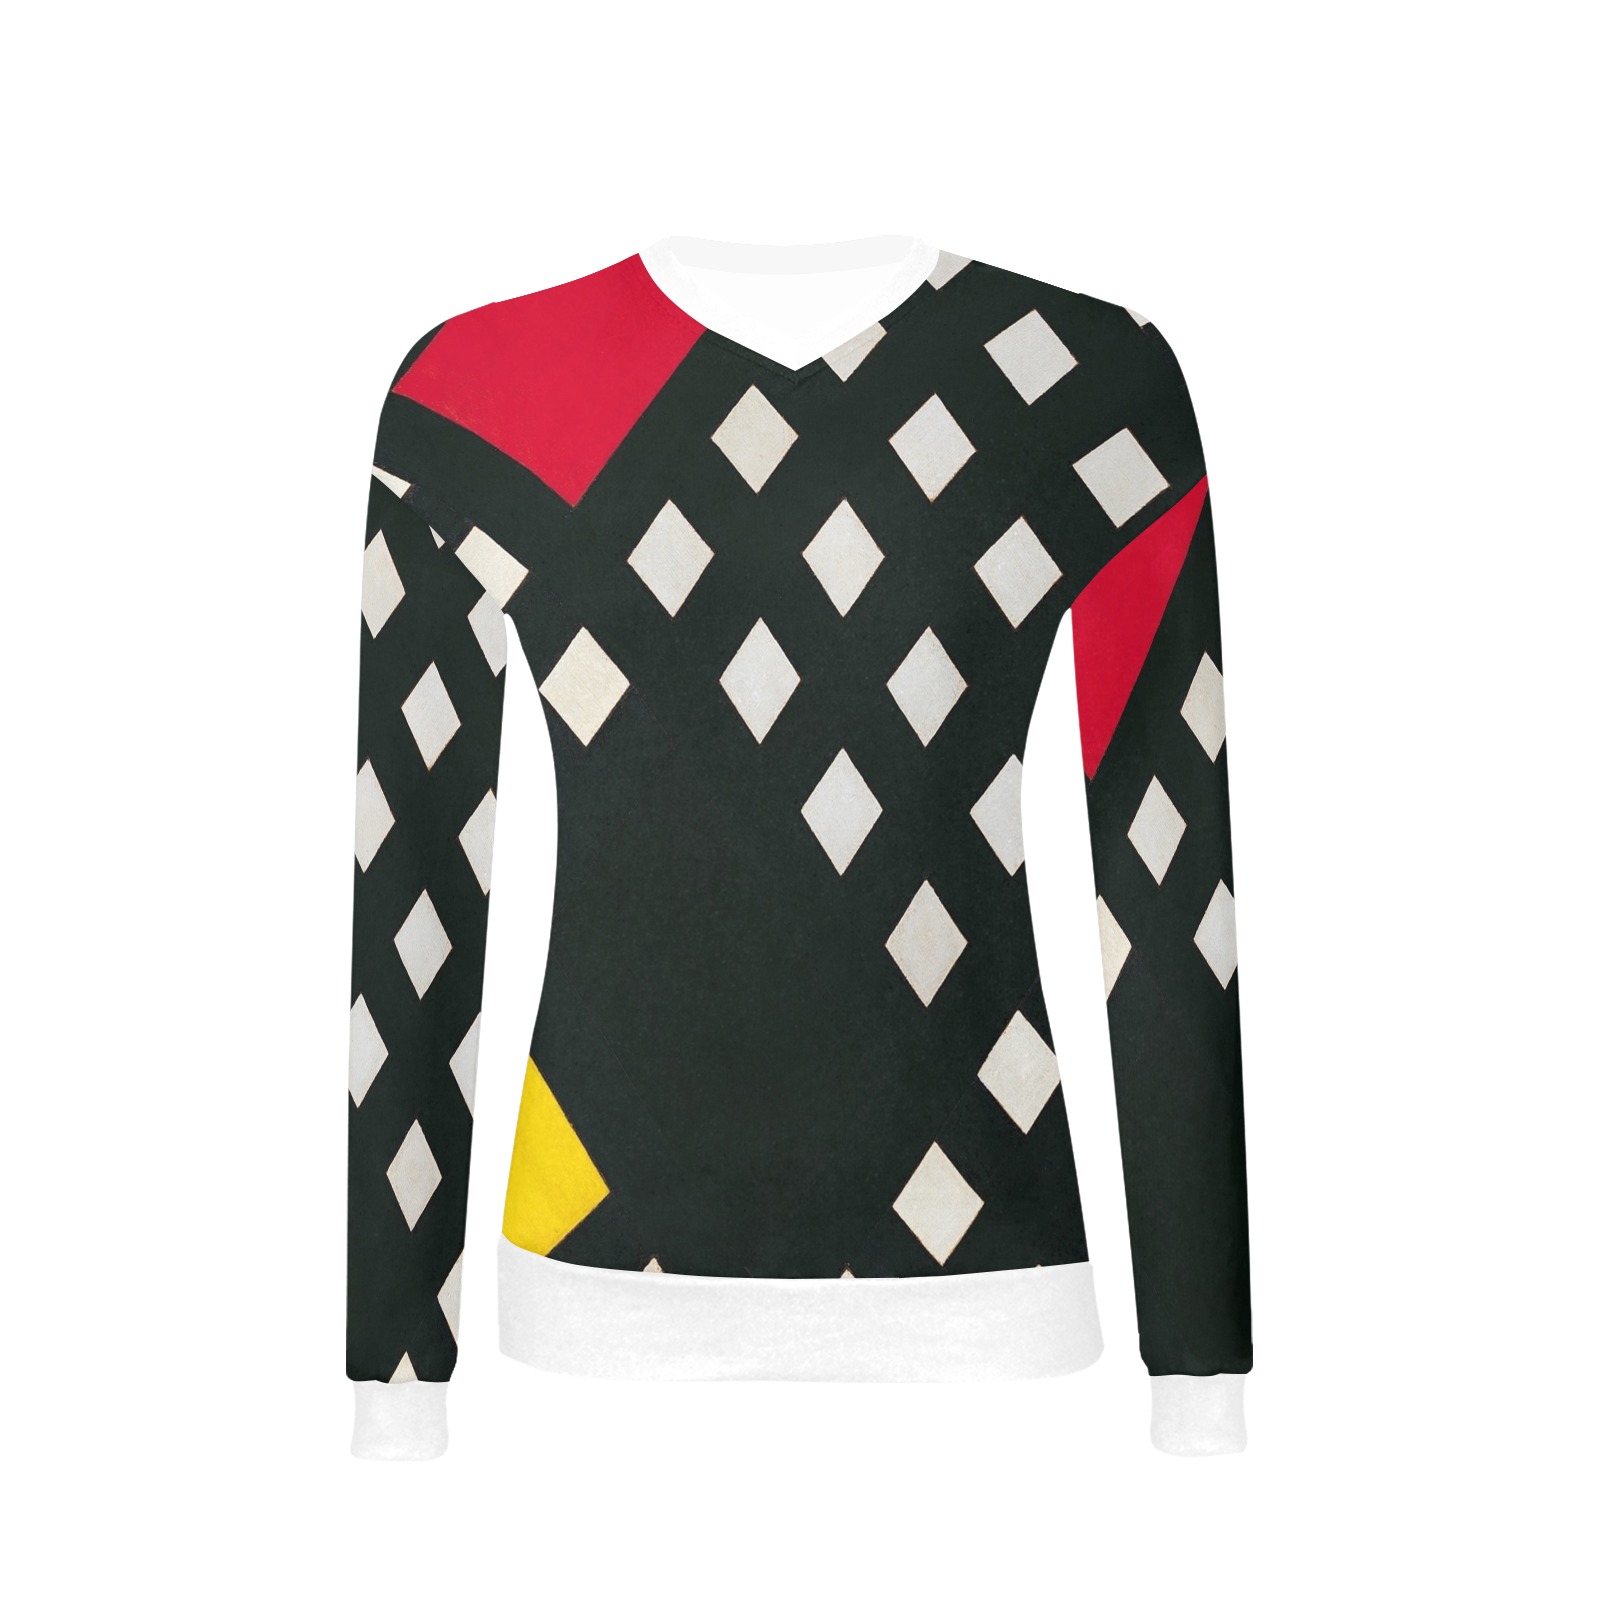 Counter-composition XV by Theo van Doesburg- Women's All Over Print V-Neck Sweater (Model H48)